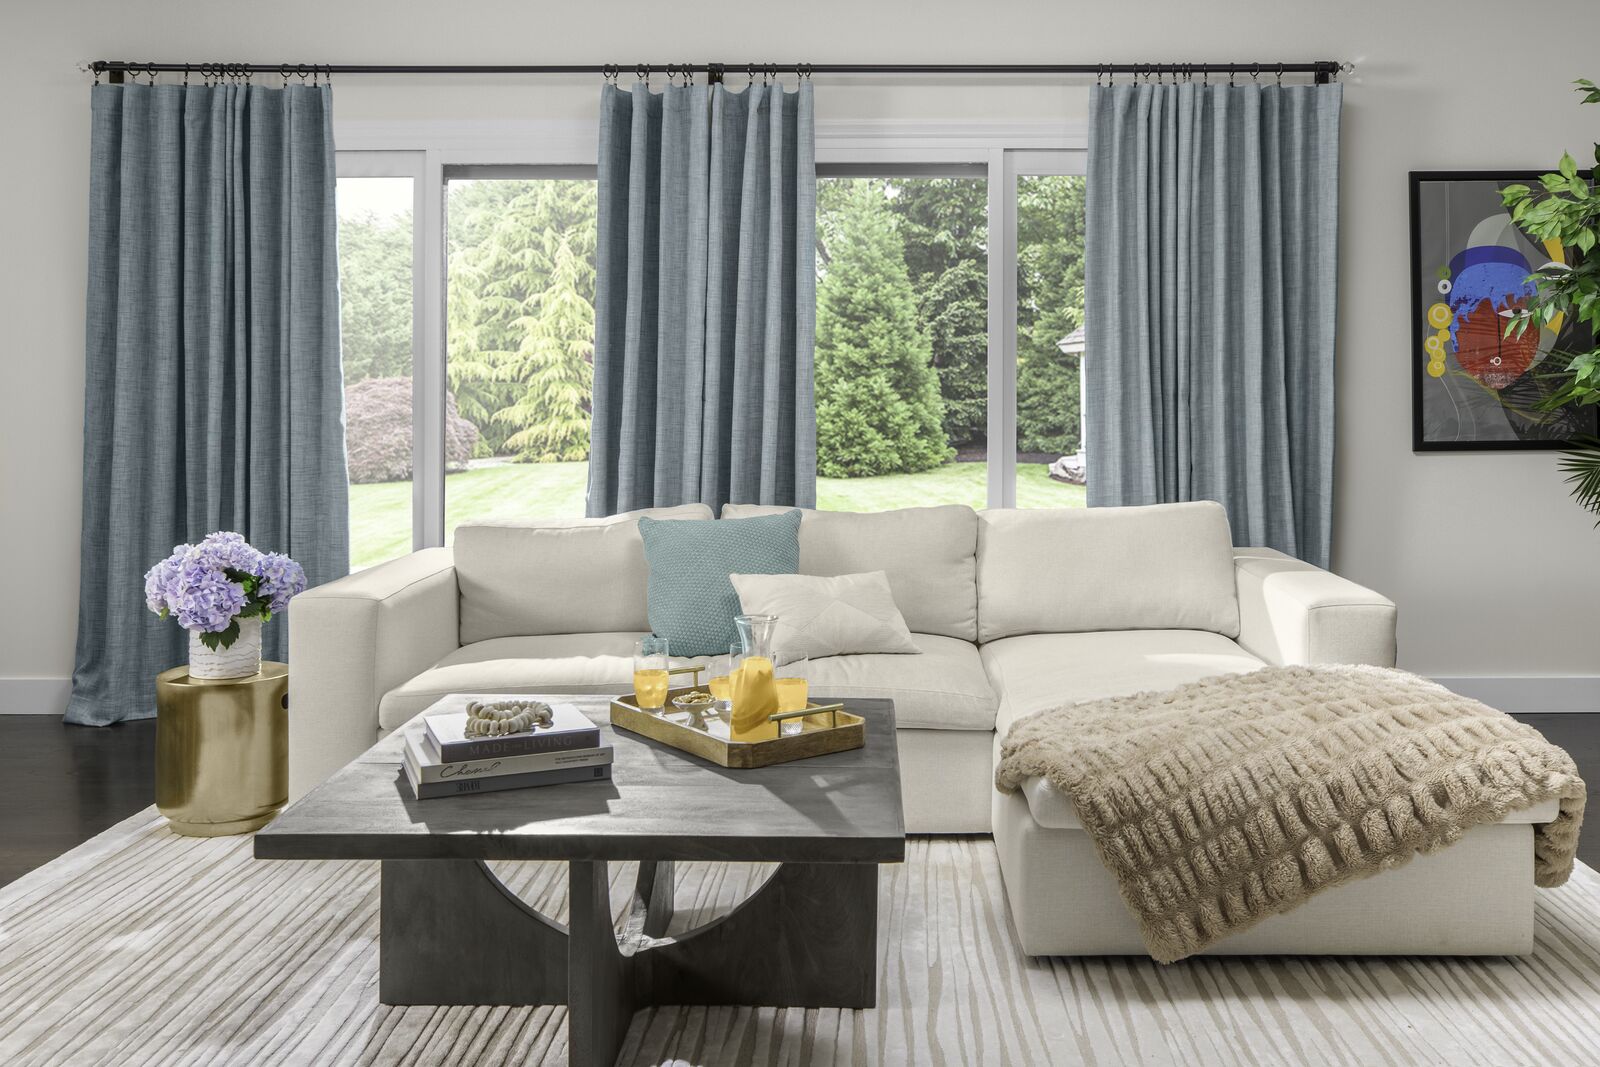 Turquoise drapes add a pop of color to a modern living room